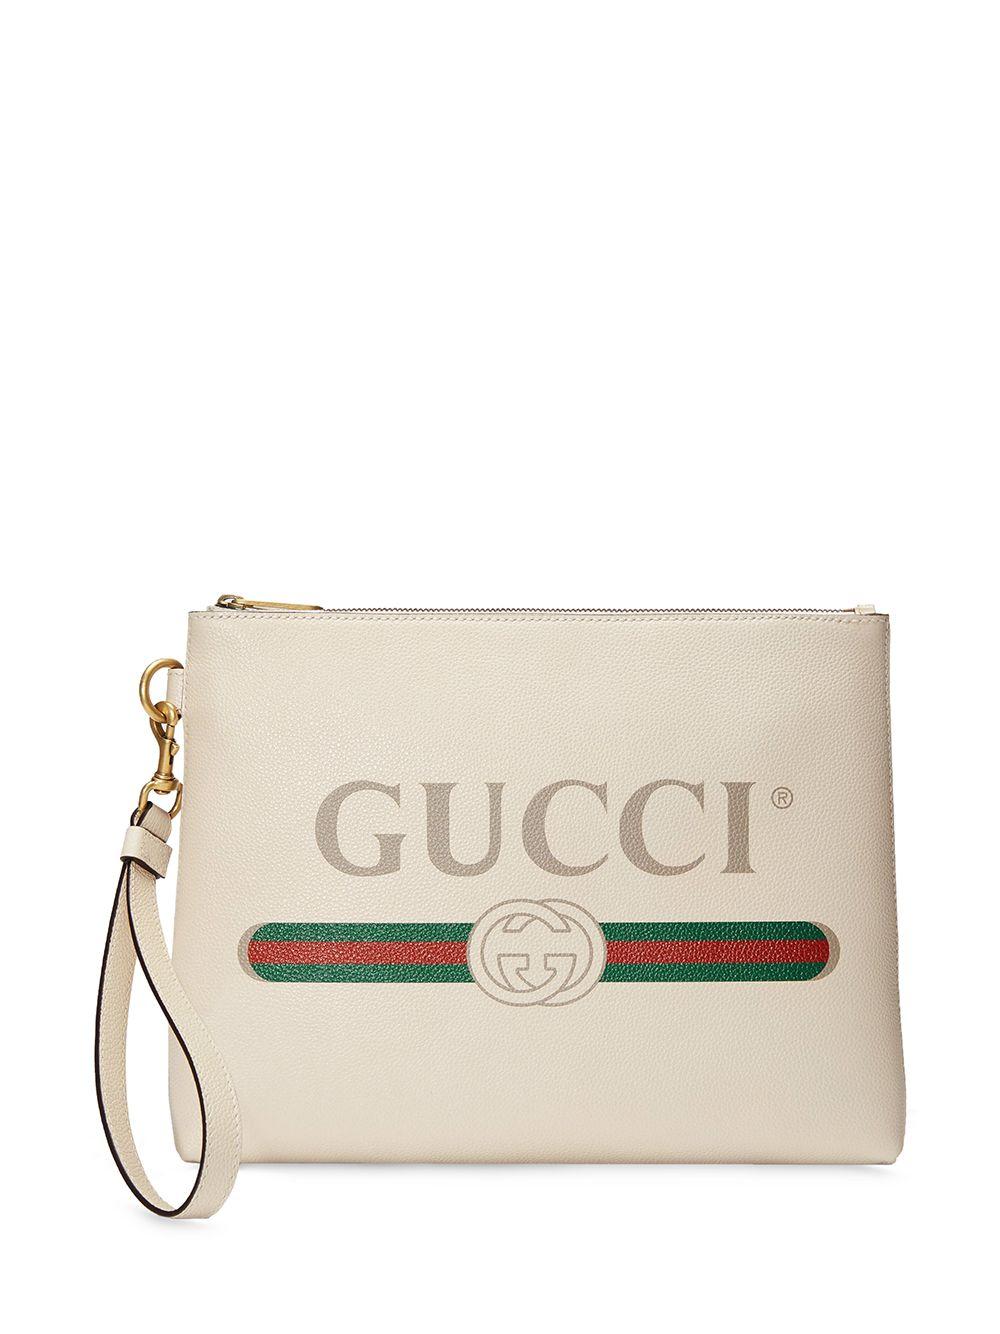 Clutch bag with logo by Gucci